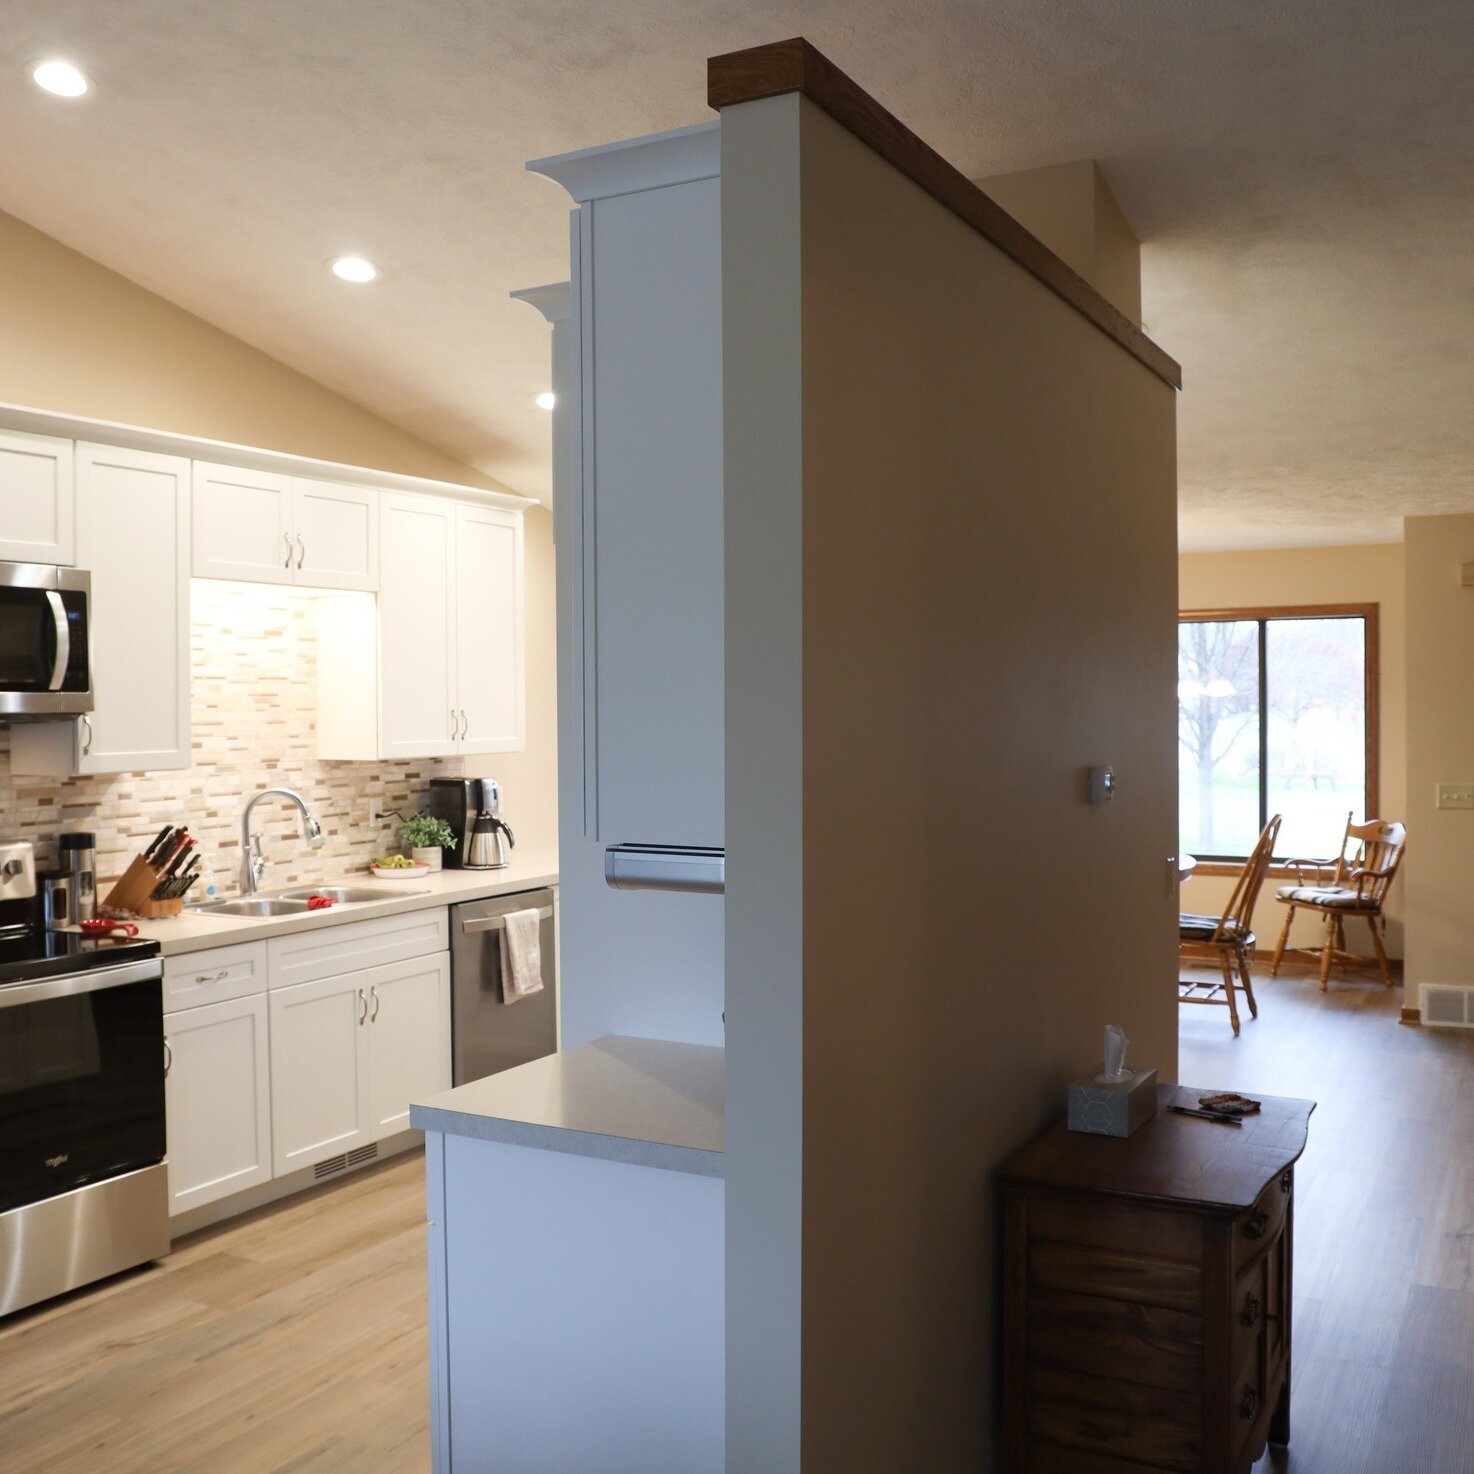 We recently completed this Condo revamp - swipe to see what we started with! By eliminating an office / bedroom and opening up the kitchen walls, this condo feels like a whole new space. 

 #kitchenremodel #kitchentransformation #kitchendesign #westm